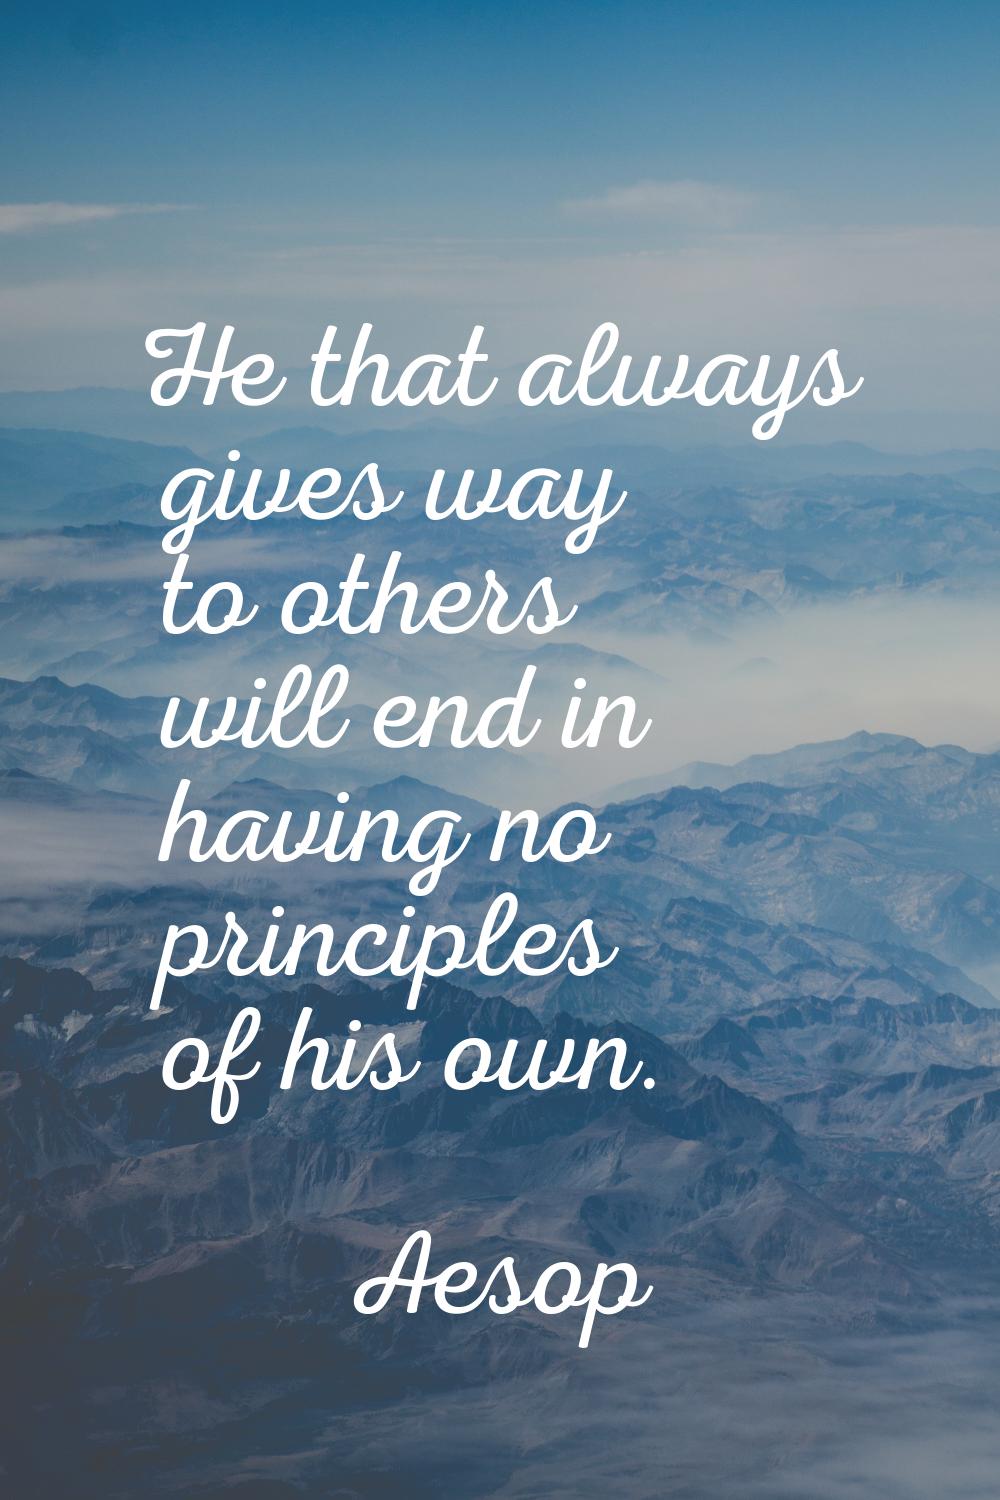 He that always gives way to others will end in having no principles of his own.